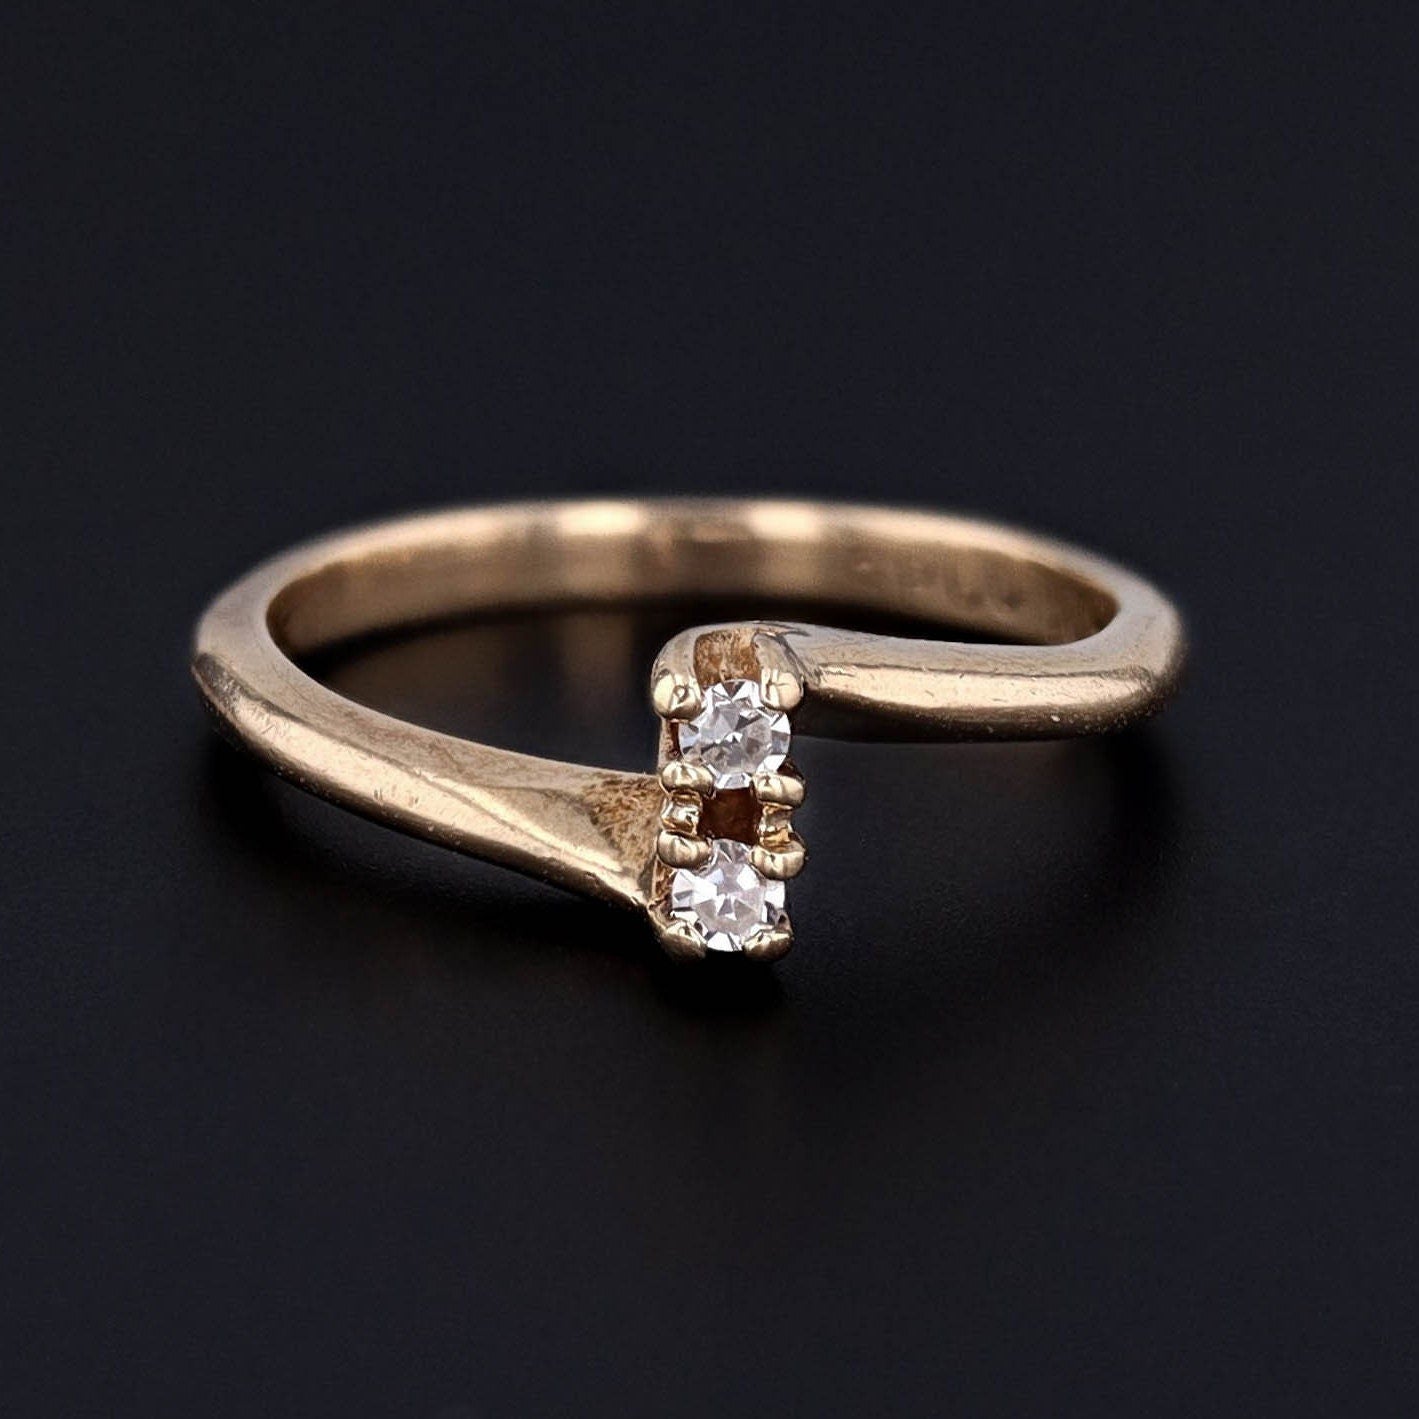 Vintage Diamond Bypass Ring of 10k Gold